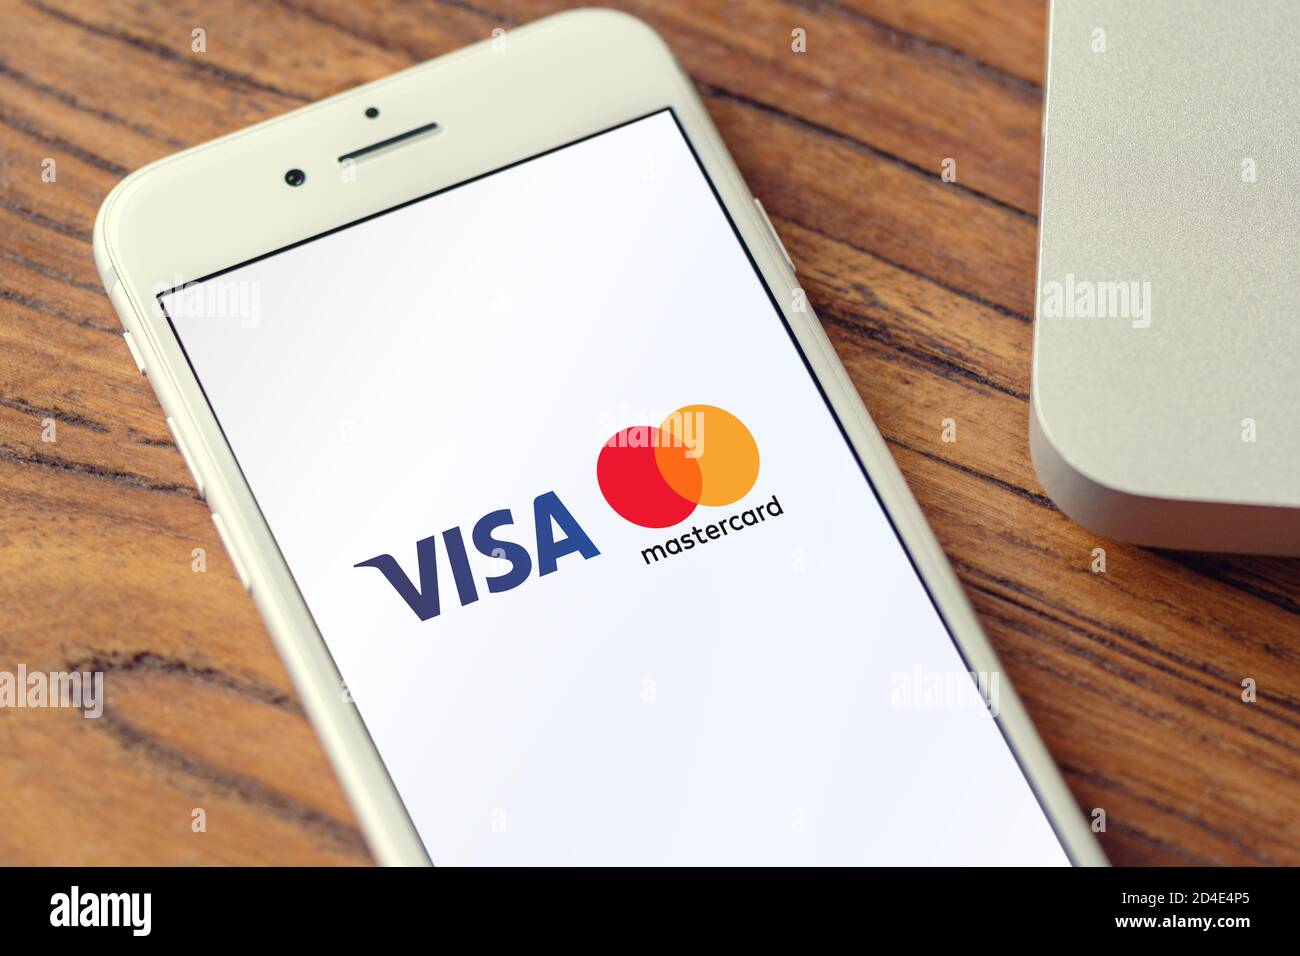 Guilherand-Granges, France - October 09, 2020. Smartphone with Visa and Mastercard logo. Multinational financial services cooperations. Credit cards. Stock Photo